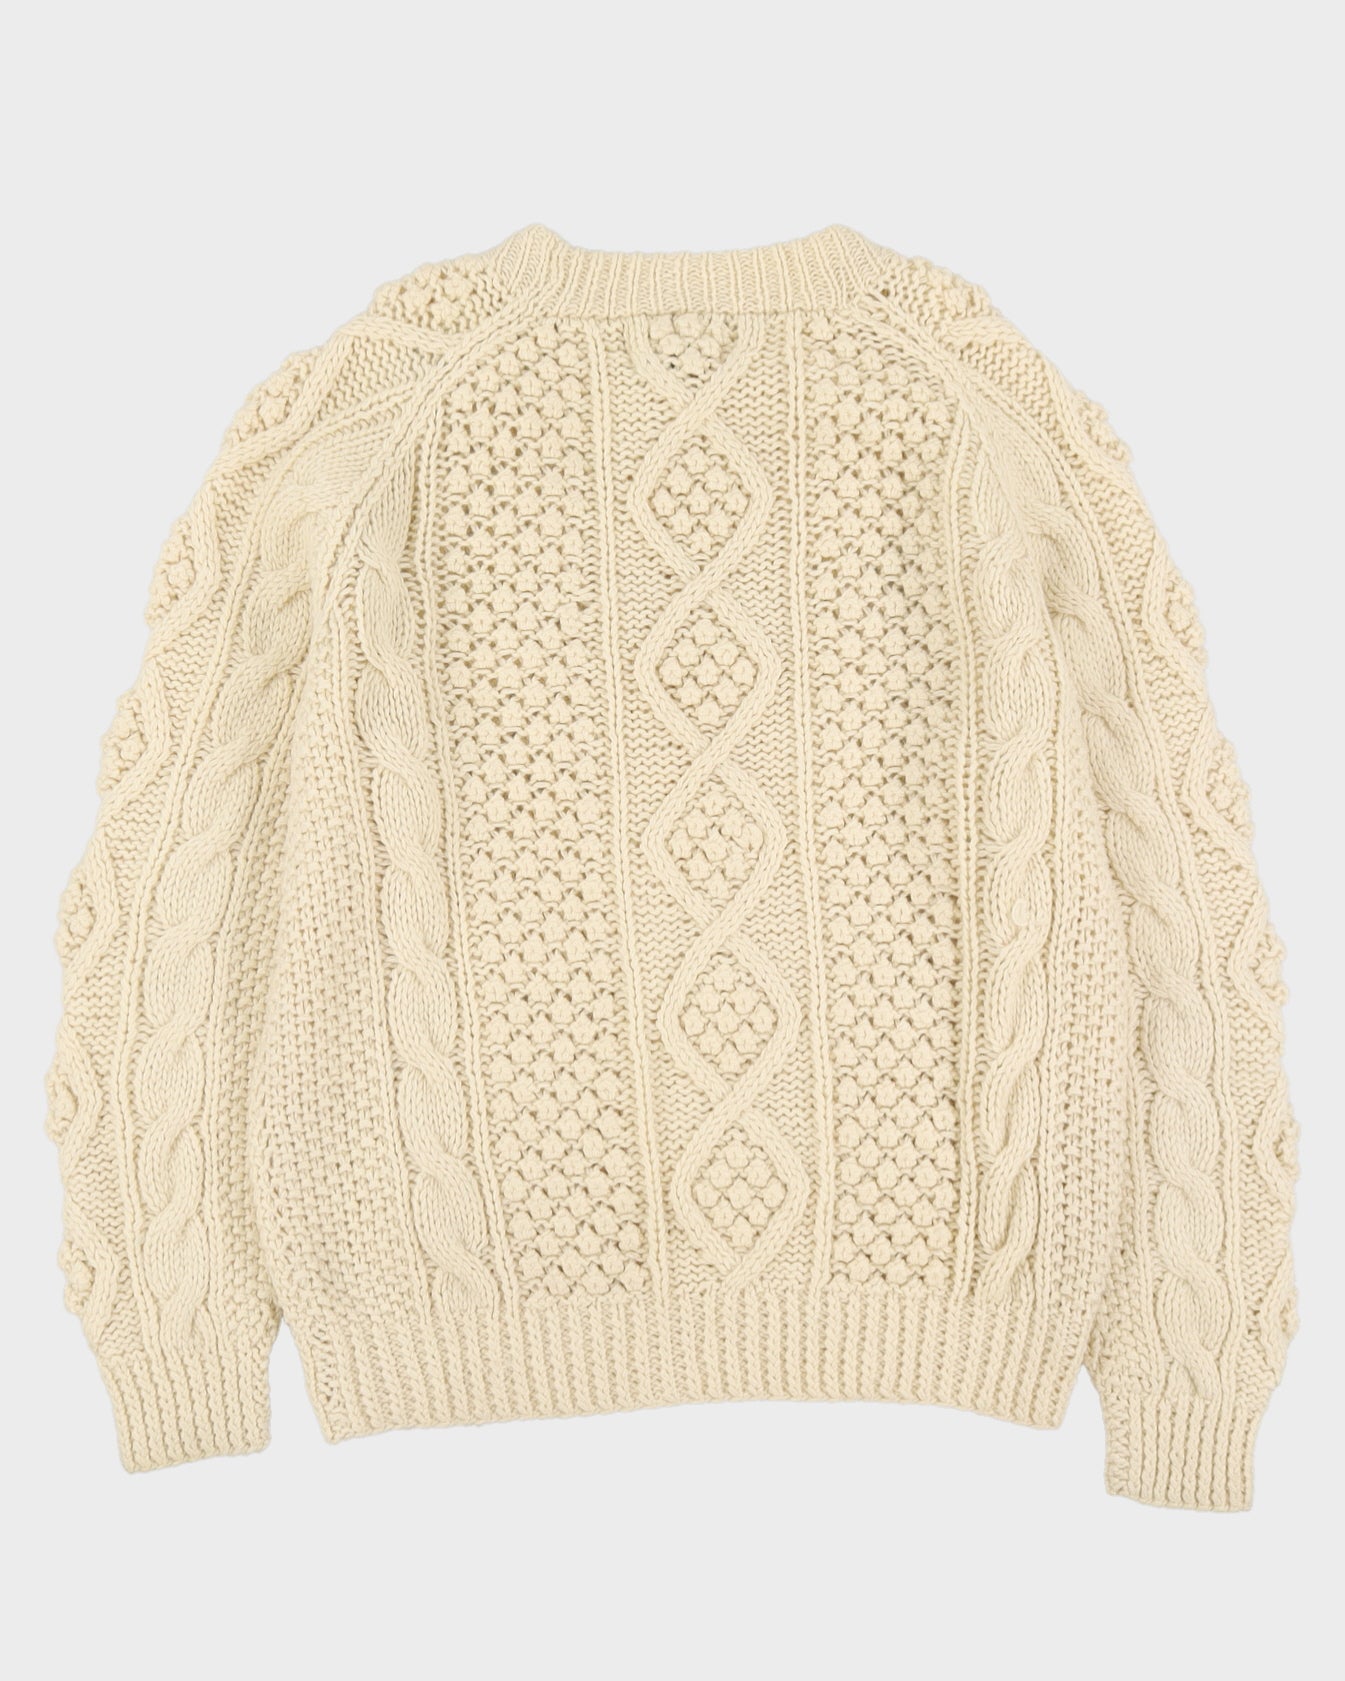 1990s Sears Cream Knitted Jumper - L